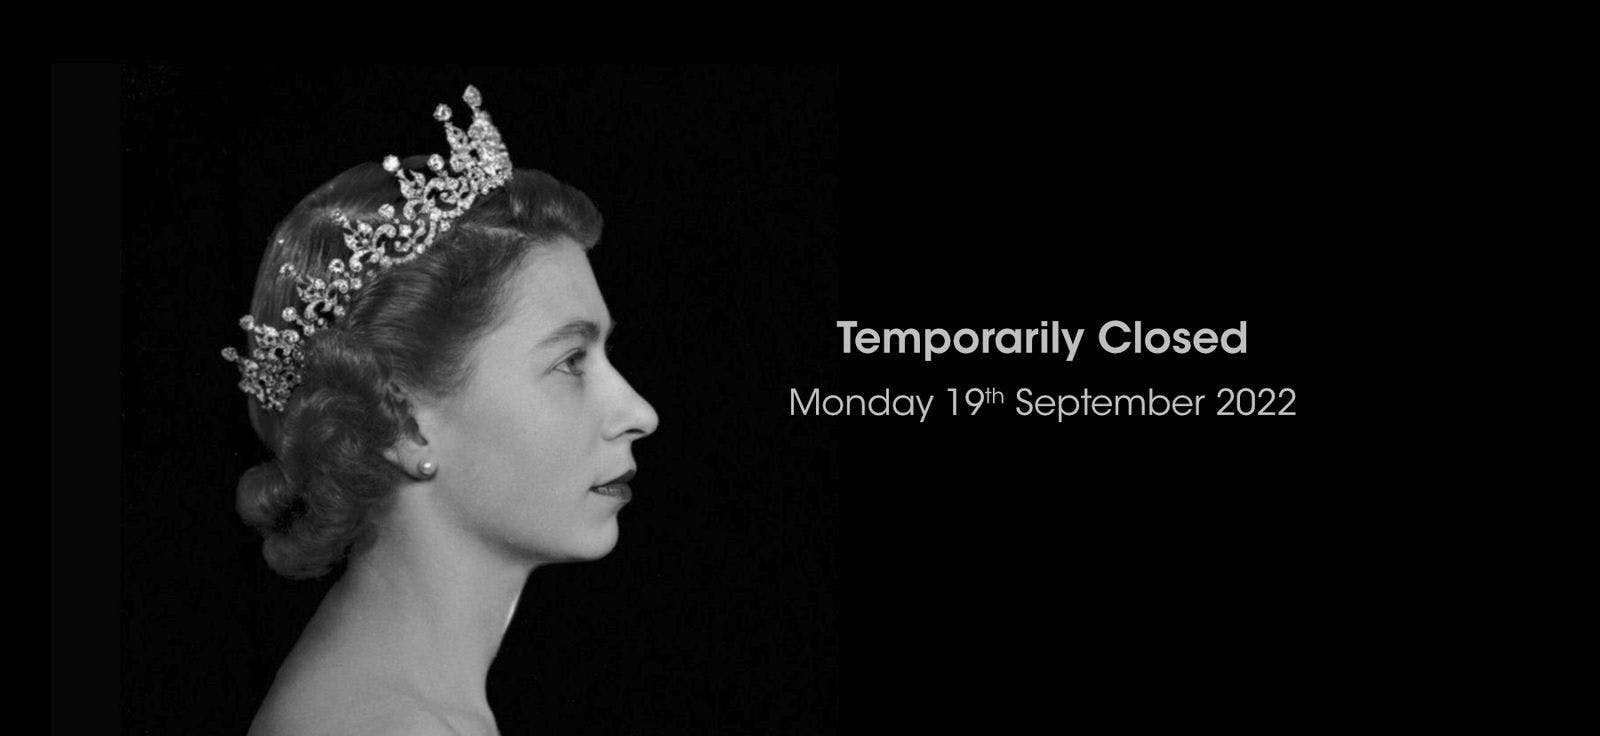 In honour of HM Queen Elizabeth II, Fine Sounds UK will be temporarily closed on Monday 19th September 2022